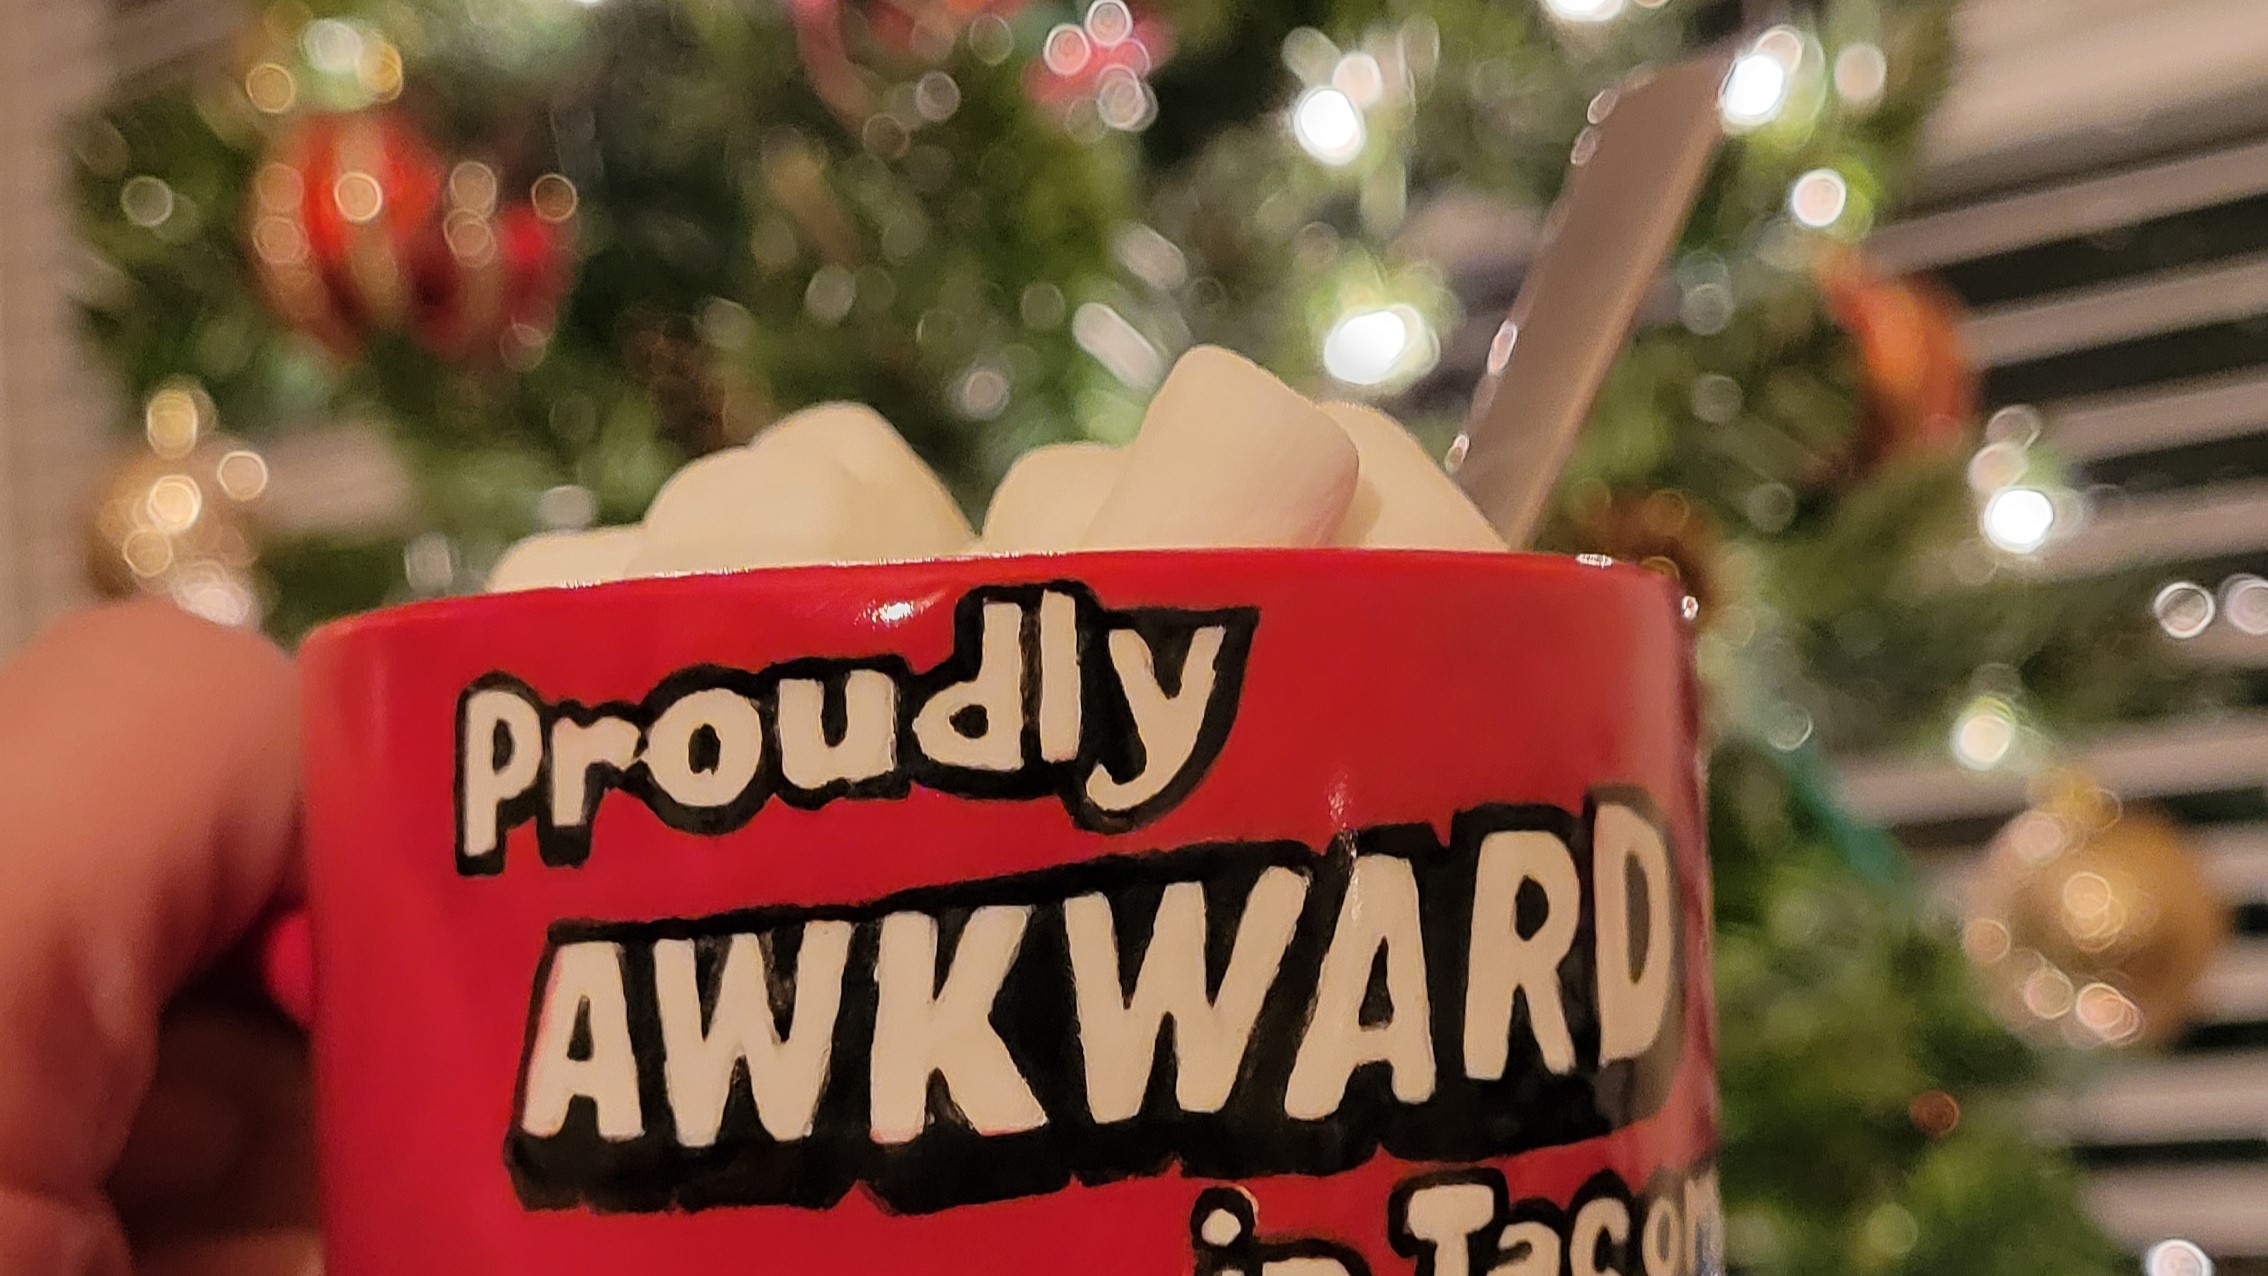 Red ceramic mug filled with hot cocoa overflowing with mini marshmallows in front of a decorated christmas tree with white lights. Mug has the text proudly awkward in white letters